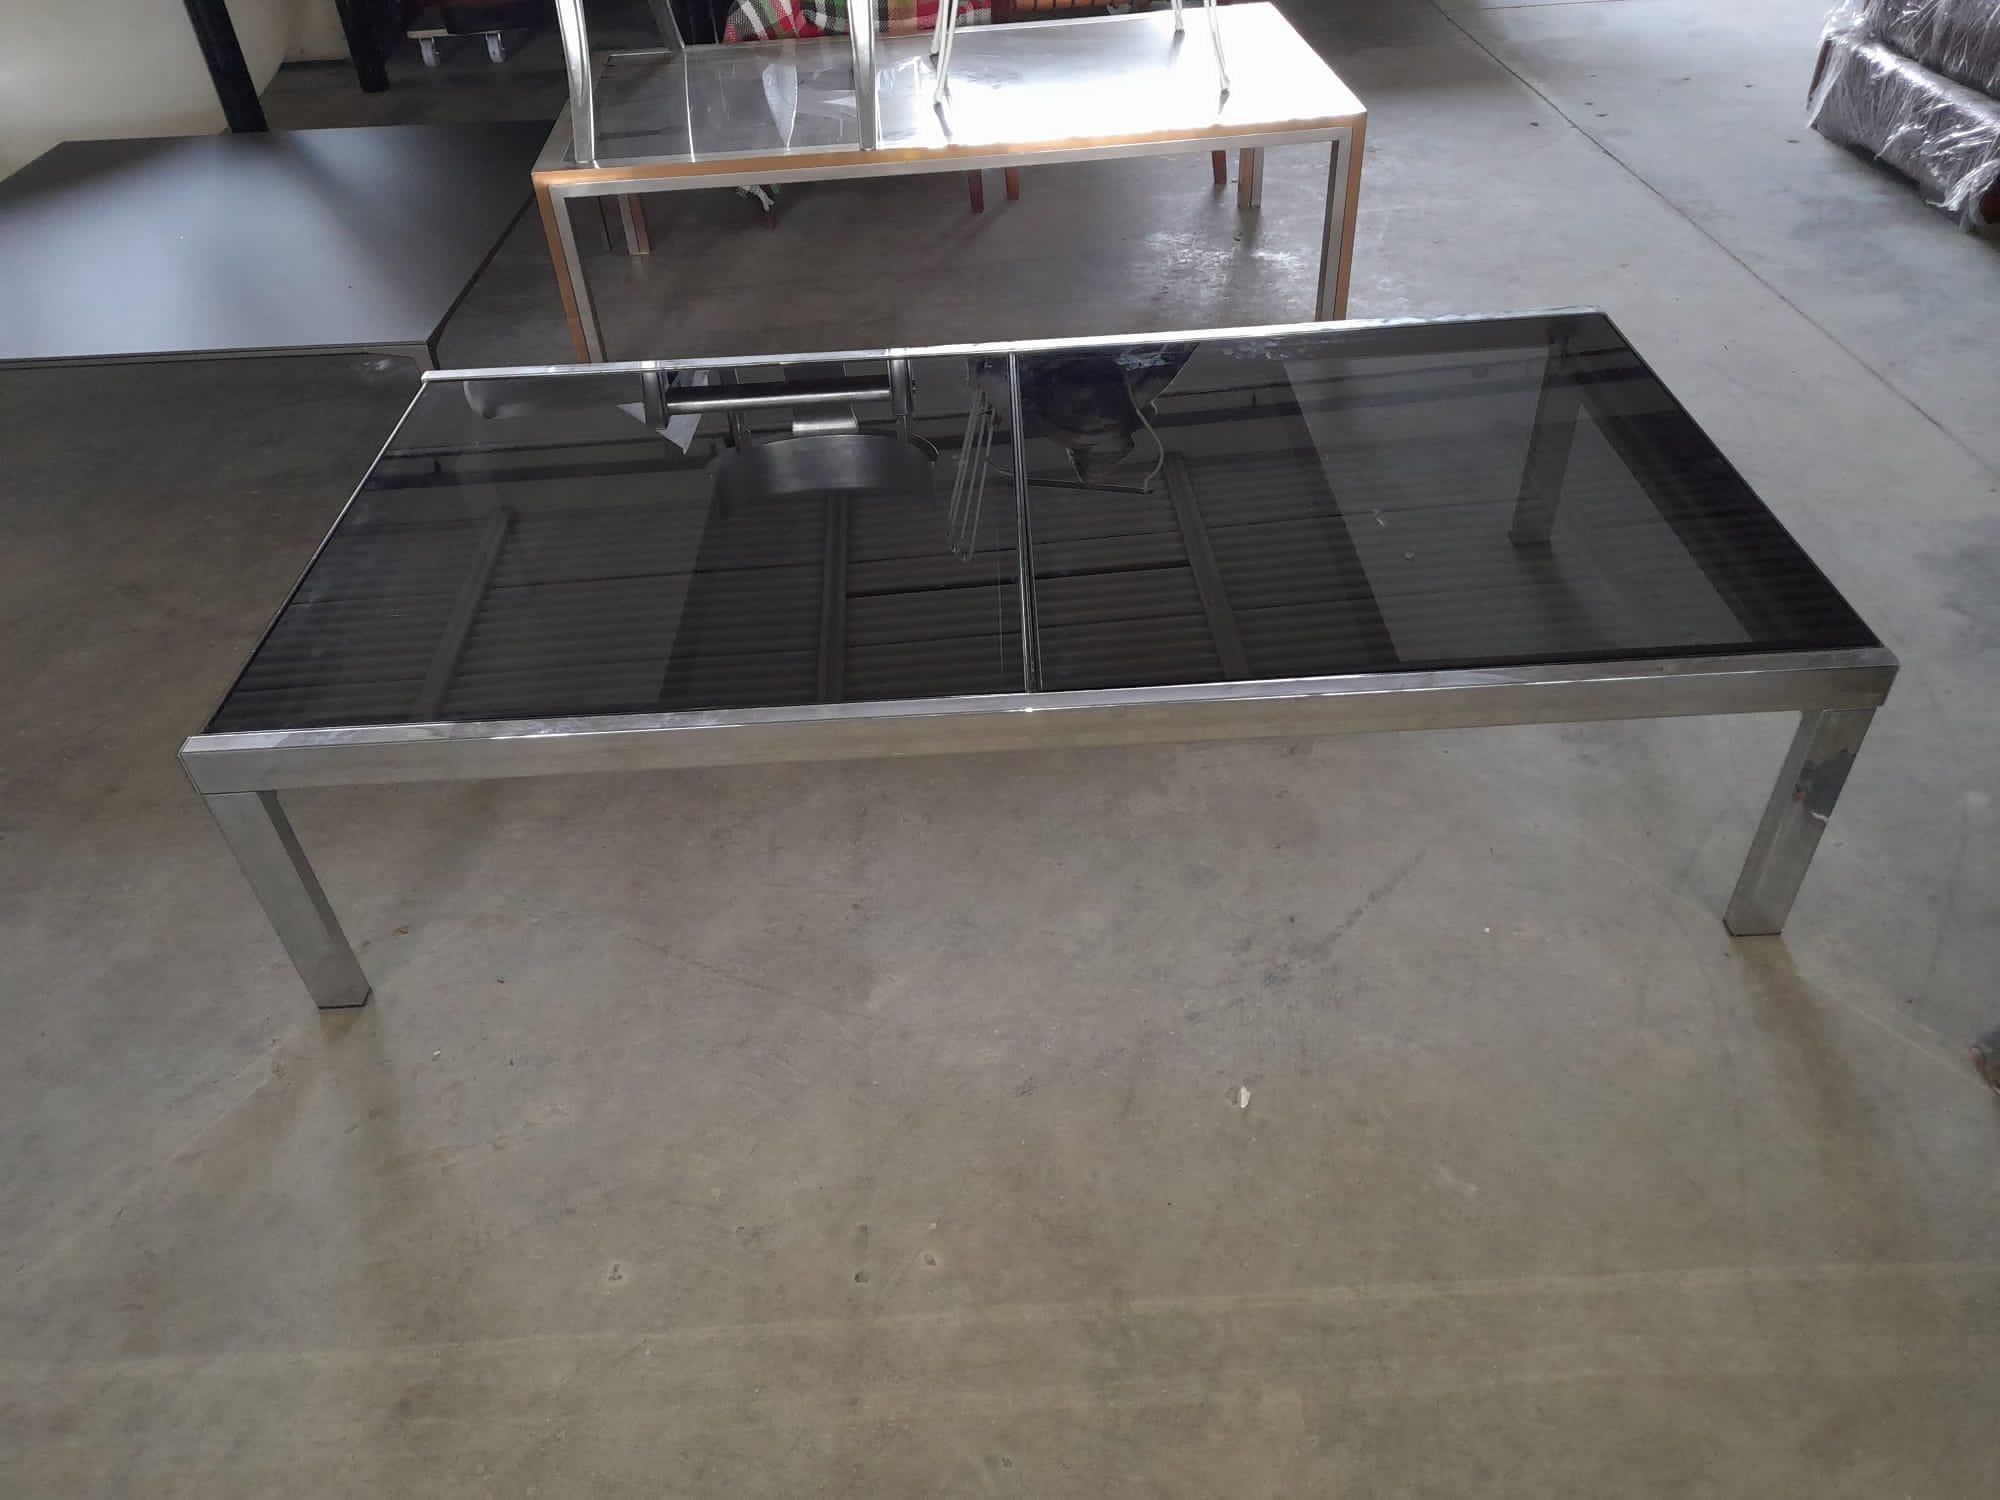 1970s Chromed steel Smoked Glass Extendable Coffee Table attributed to Knoll
size: D 80 cm x H 35 x W 155 /235 cm 
Original glasses, Very good condition, no restoration needed.
A video is available upon request.

 